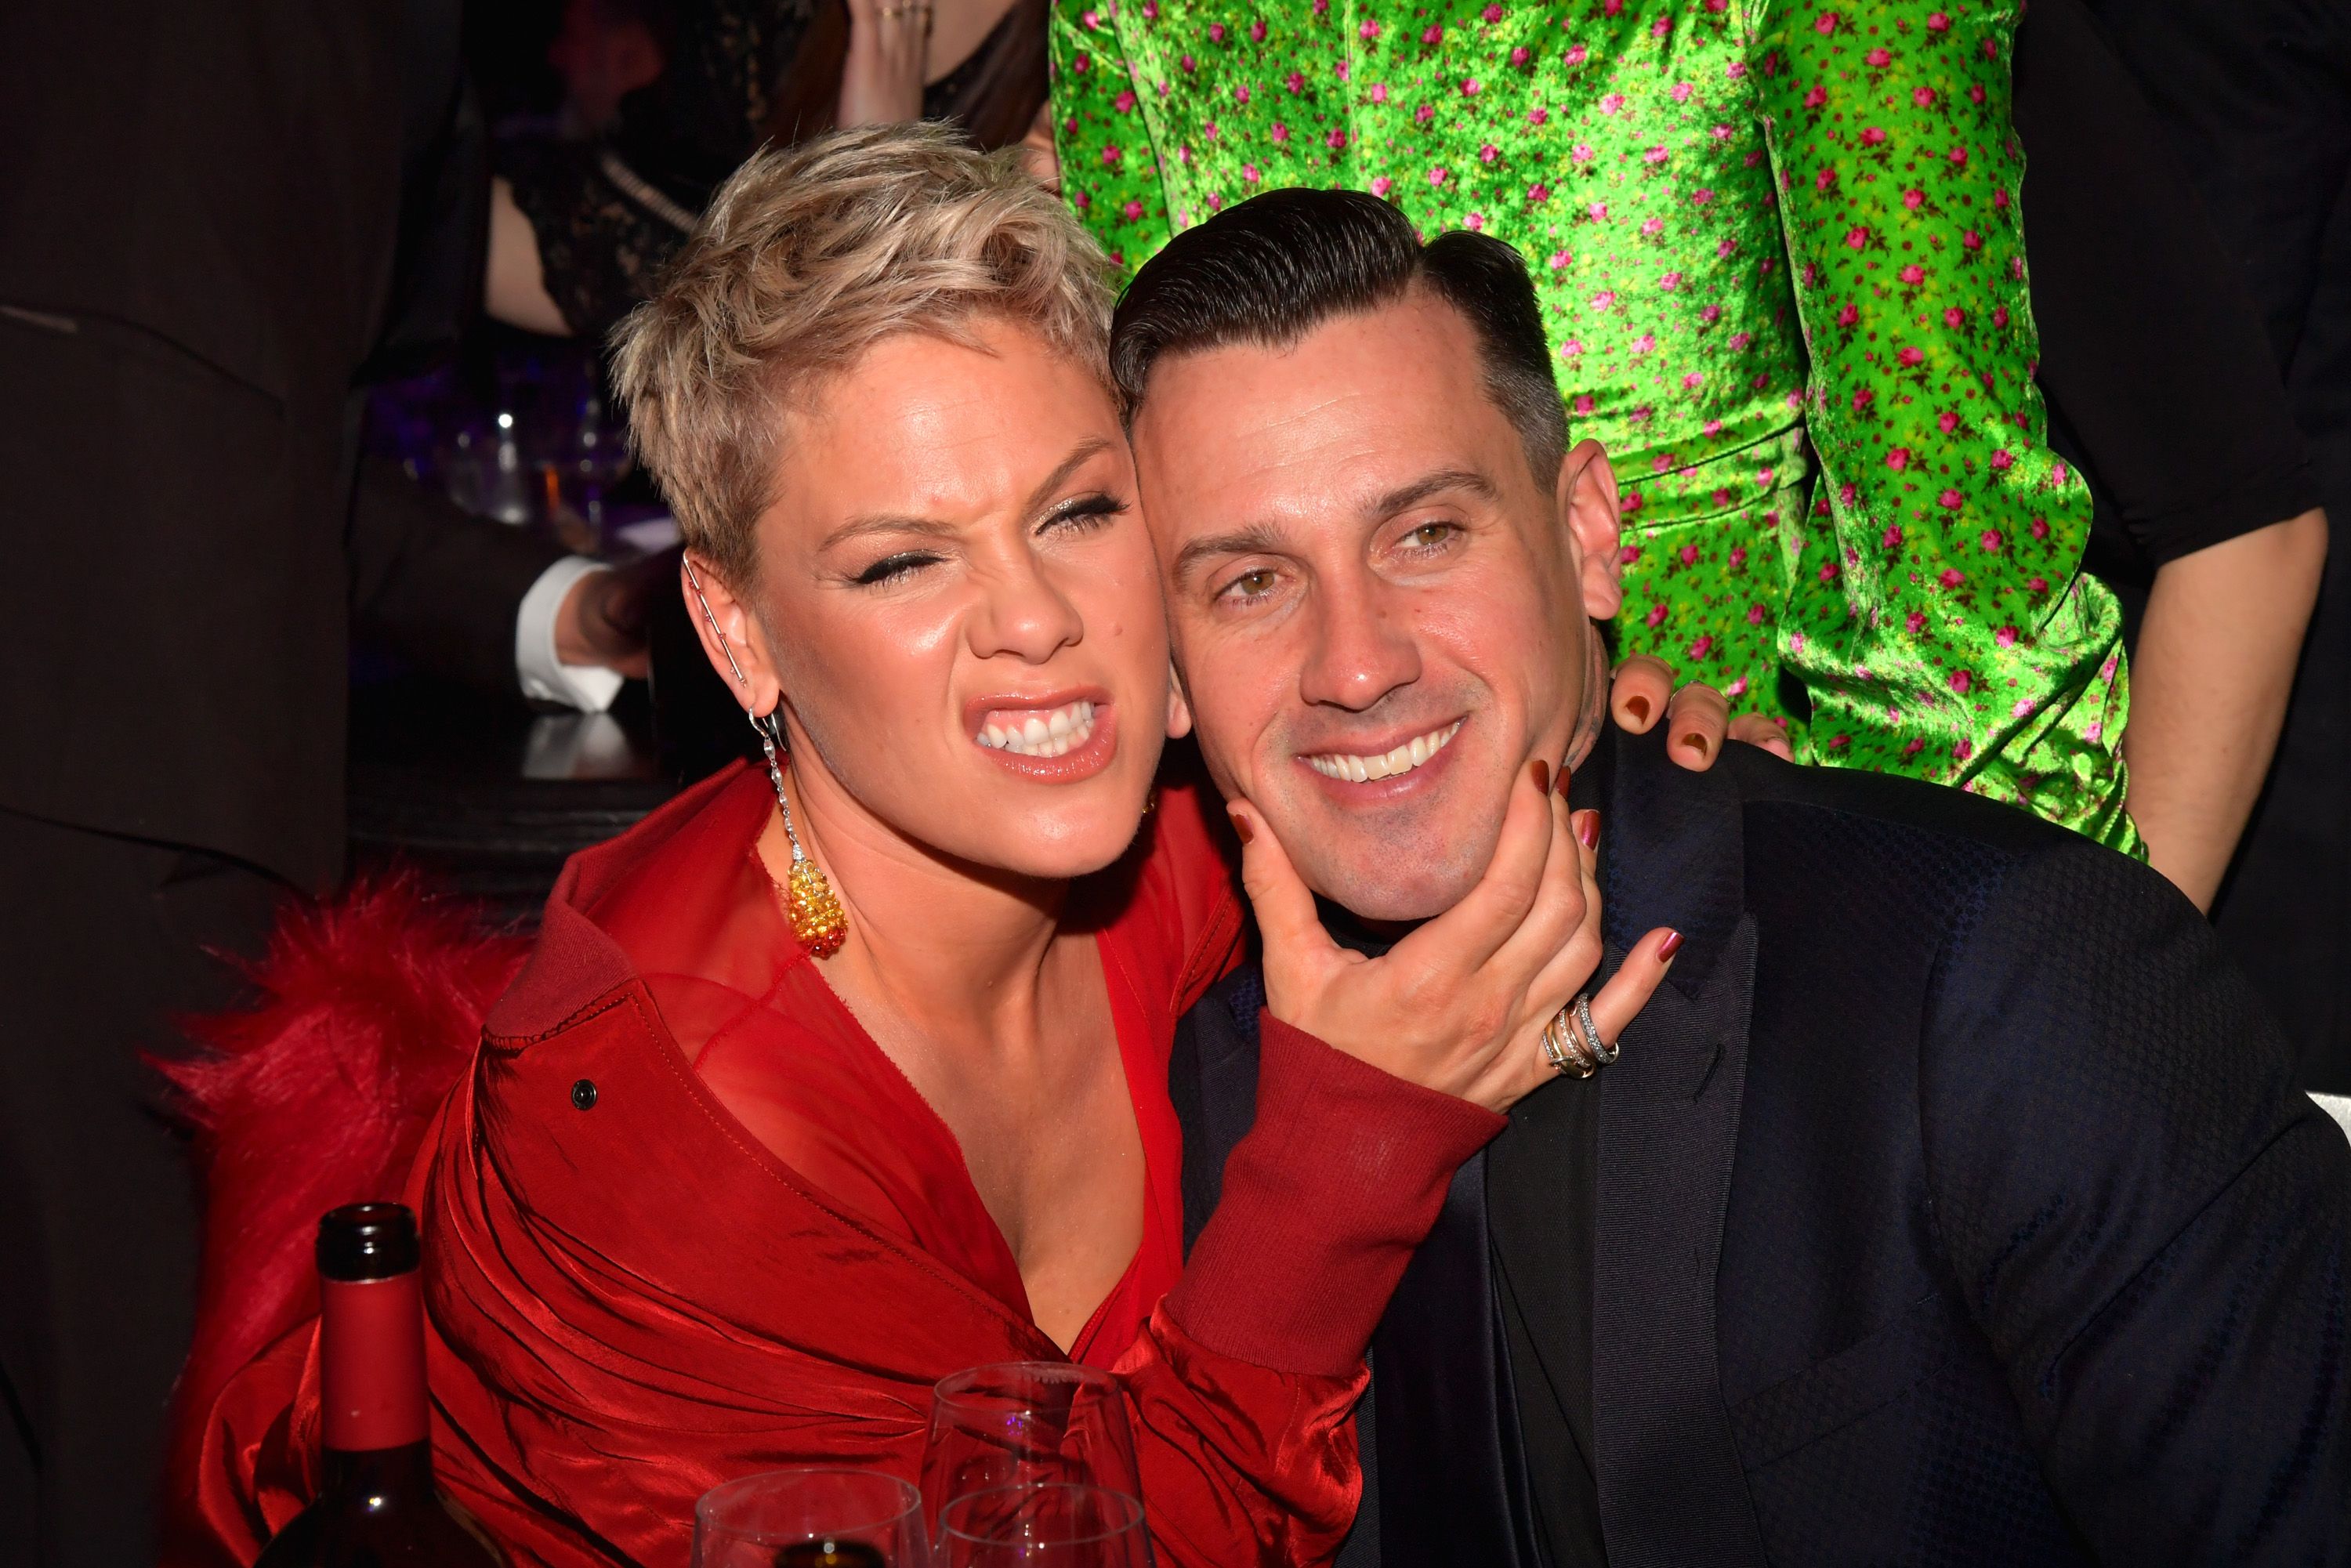 Pink and Carey Hart at the Clive Davis and Recording Academy Pre-Grammy Gala on January 27, 2018, in New York City. | Source: Lester Cohen/Getty Images